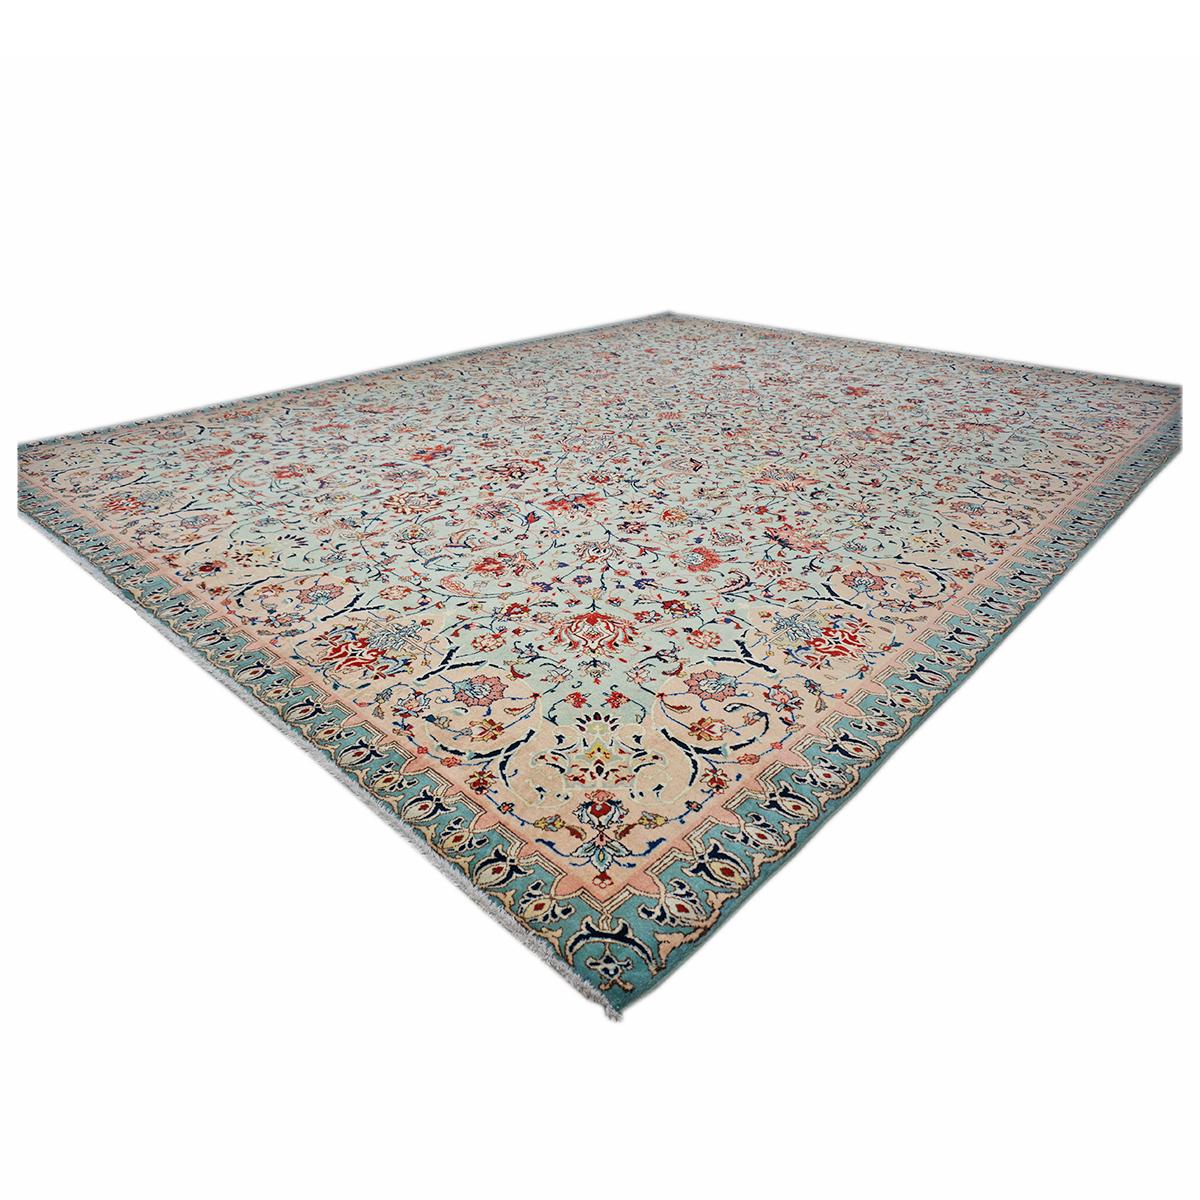 Mid-20th Century Antique Persian Tabriz Emad 9x12 Mint Green & Pink Handmade Area Rug For Sale